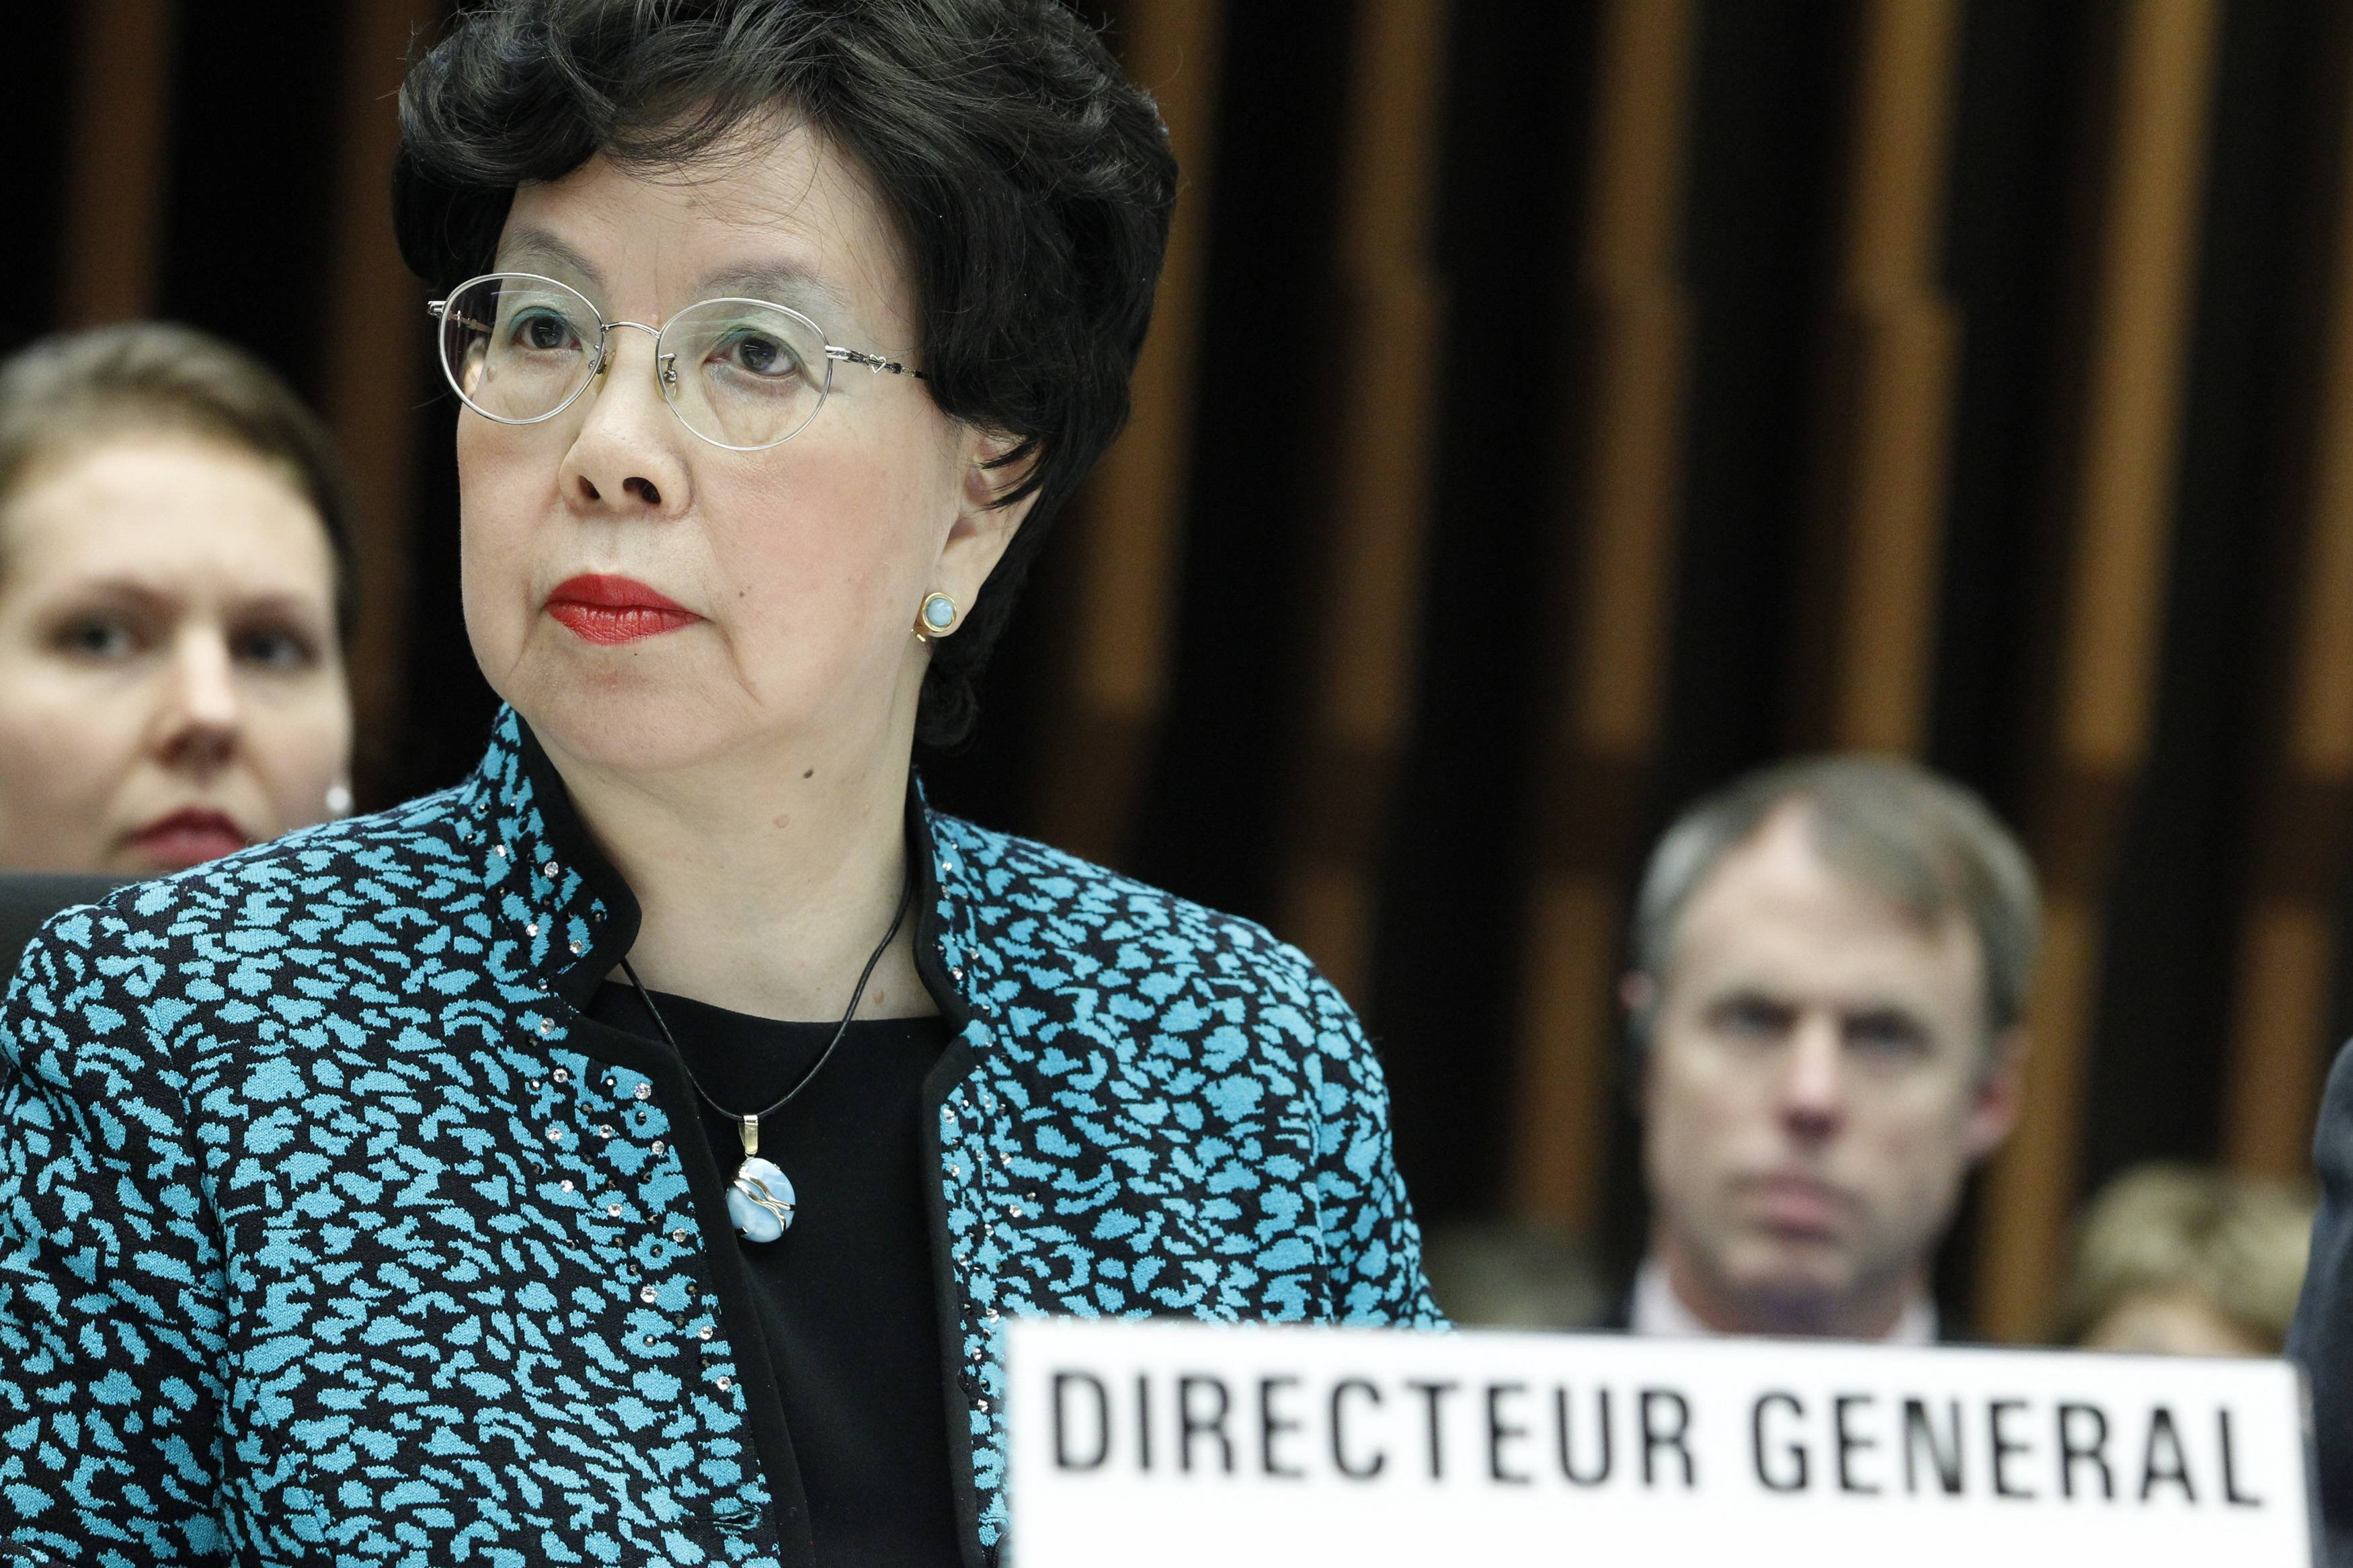 WHO Director-General Margaret Chan addresses the media during a special meeting on Ebola at the WHO headquarters in Geneva